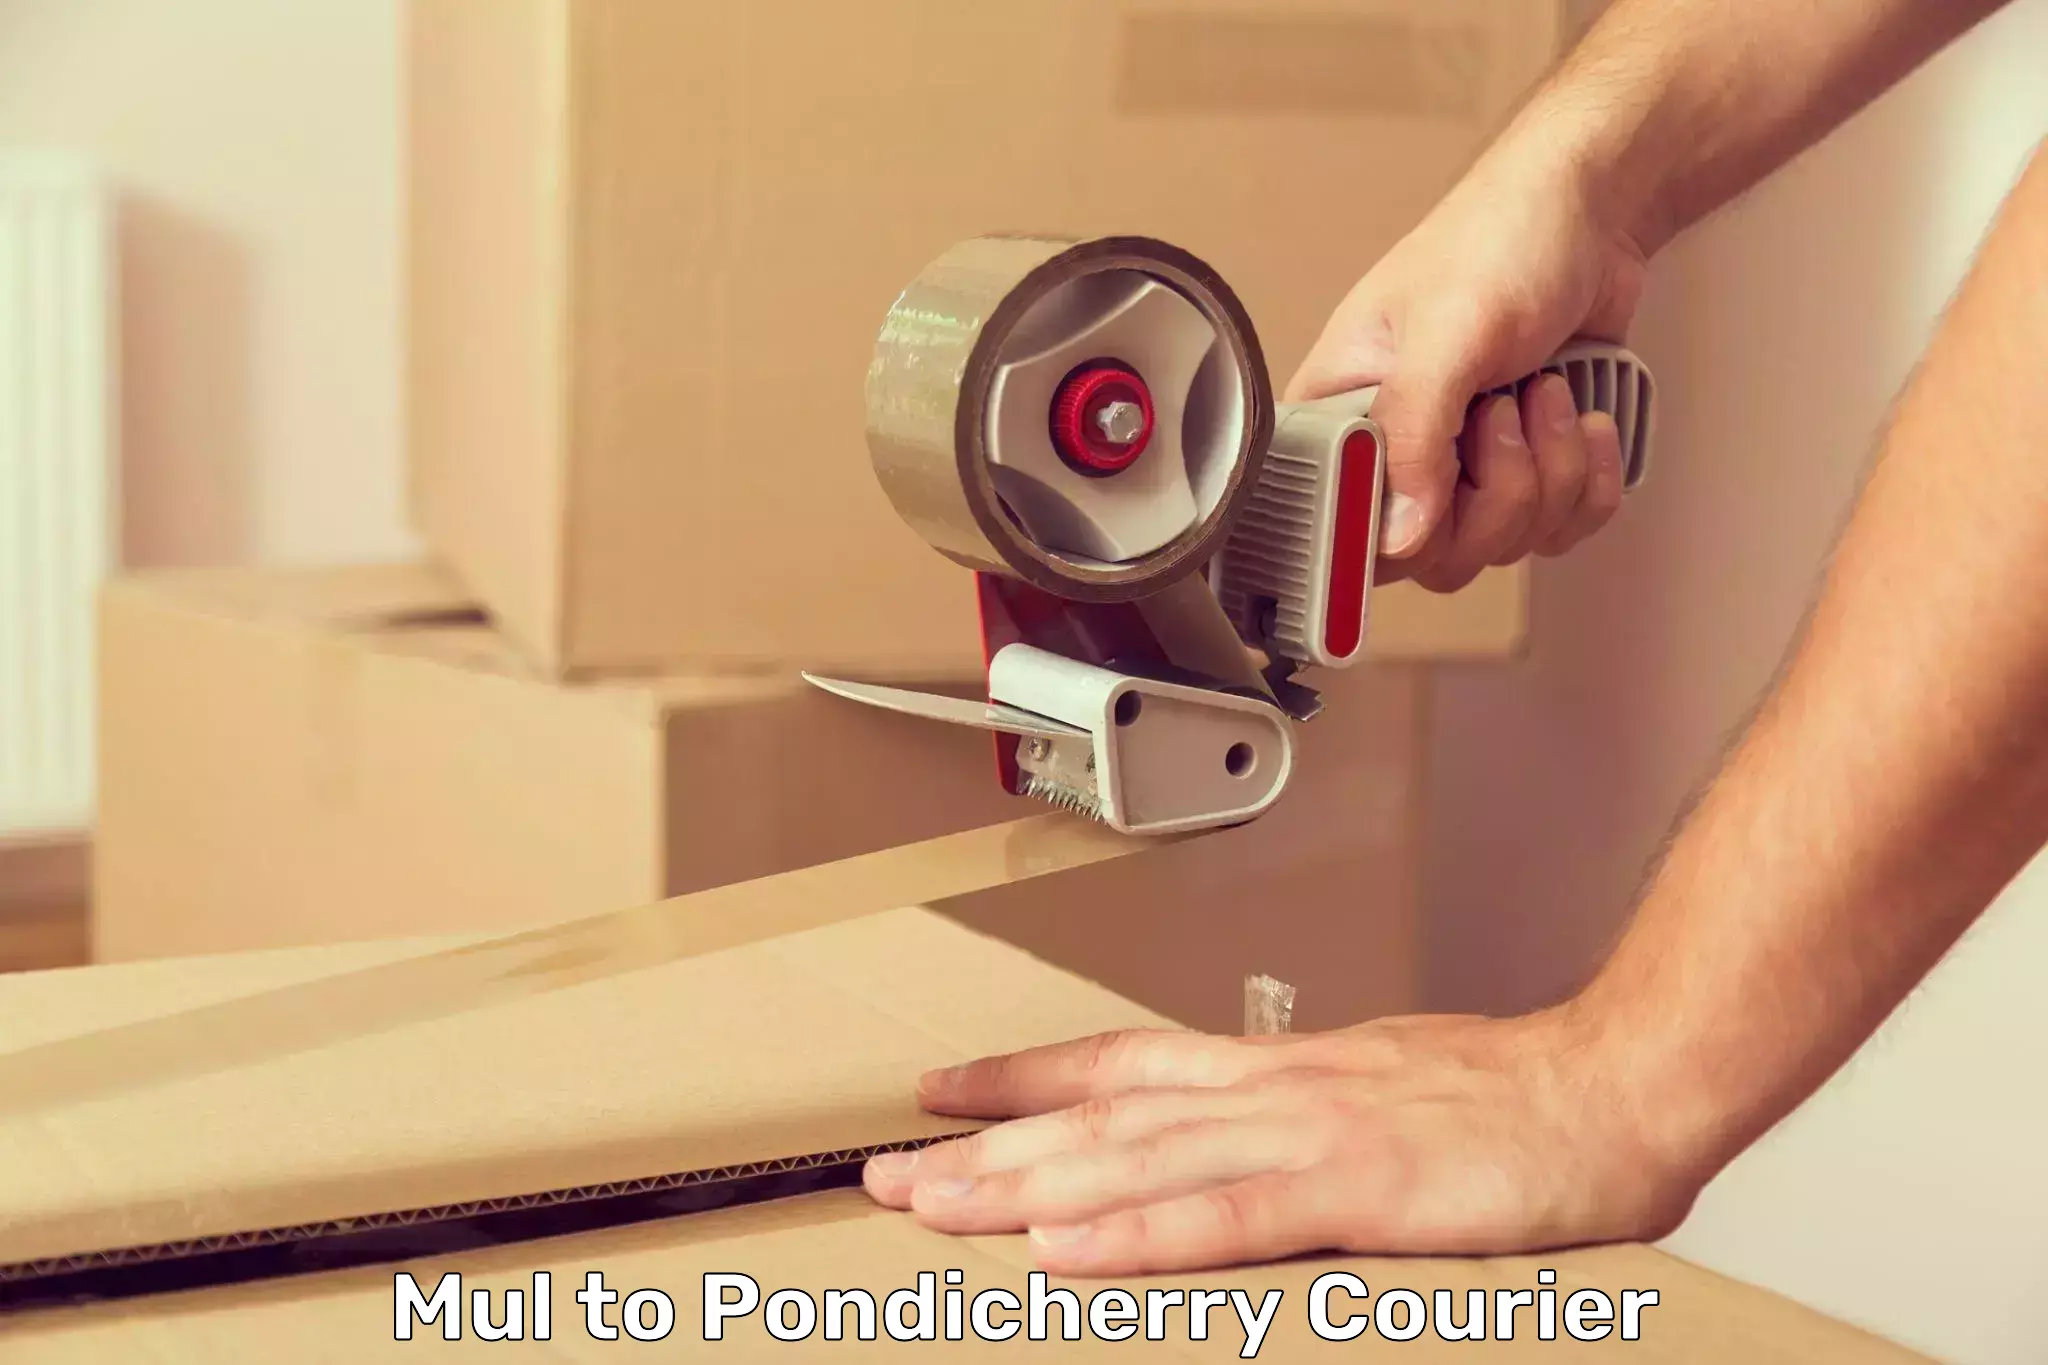 Flexible delivery scheduling Mul to Pondicherry